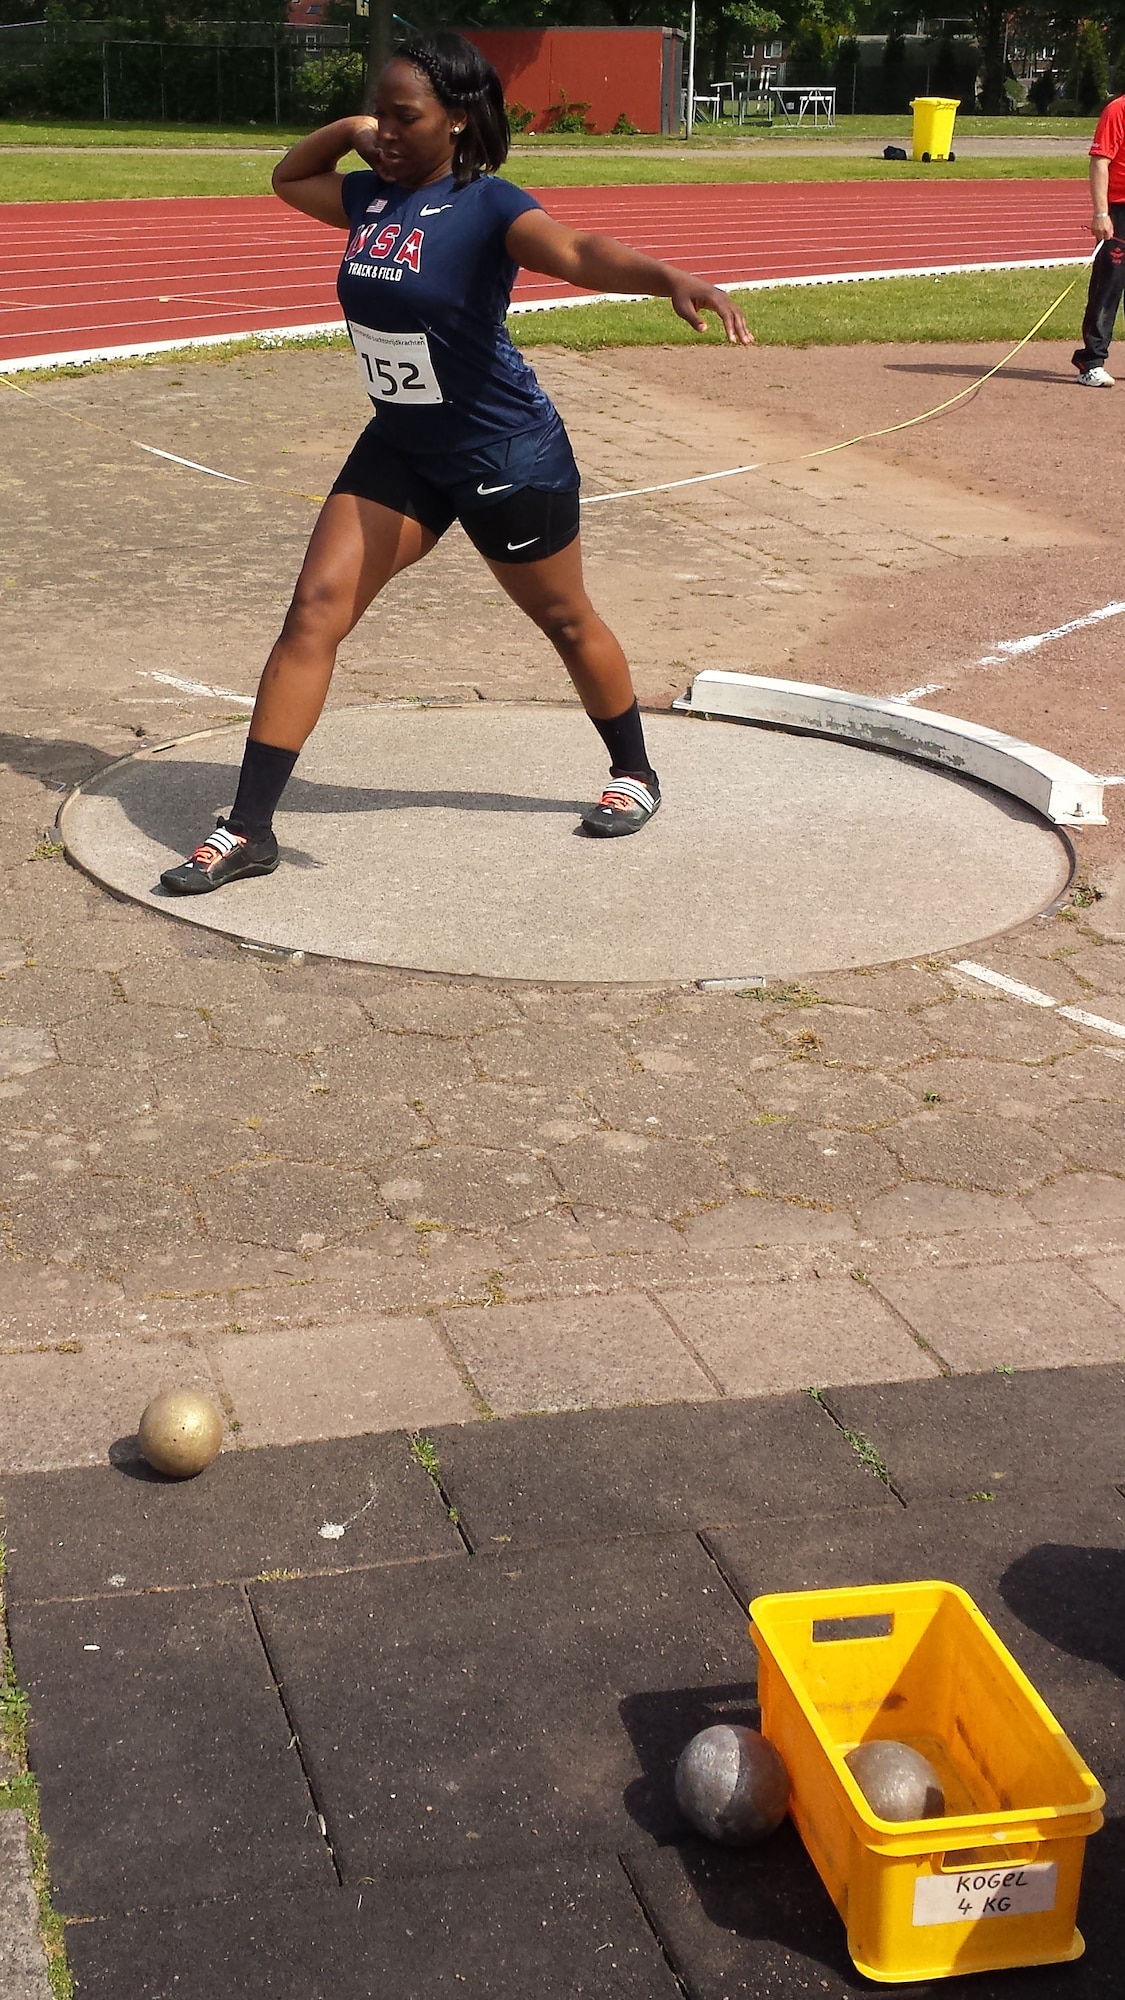 Airman 1st Class Jessica Johnson, a 4th Aerospace Medicine Squadron public health technician, prepares to throw a shot put May 27, 2015, at the 2015 Headquarters Aircom Inter-Nation Athletics Championship in Amsterdam. Johnson threw the shot 11.44 meters, finishing the competition in second place, and contributing to the U.S. Air Forces in Europe – Air Forces Africa women's team taking home the gold medal. (Courtesy photo)